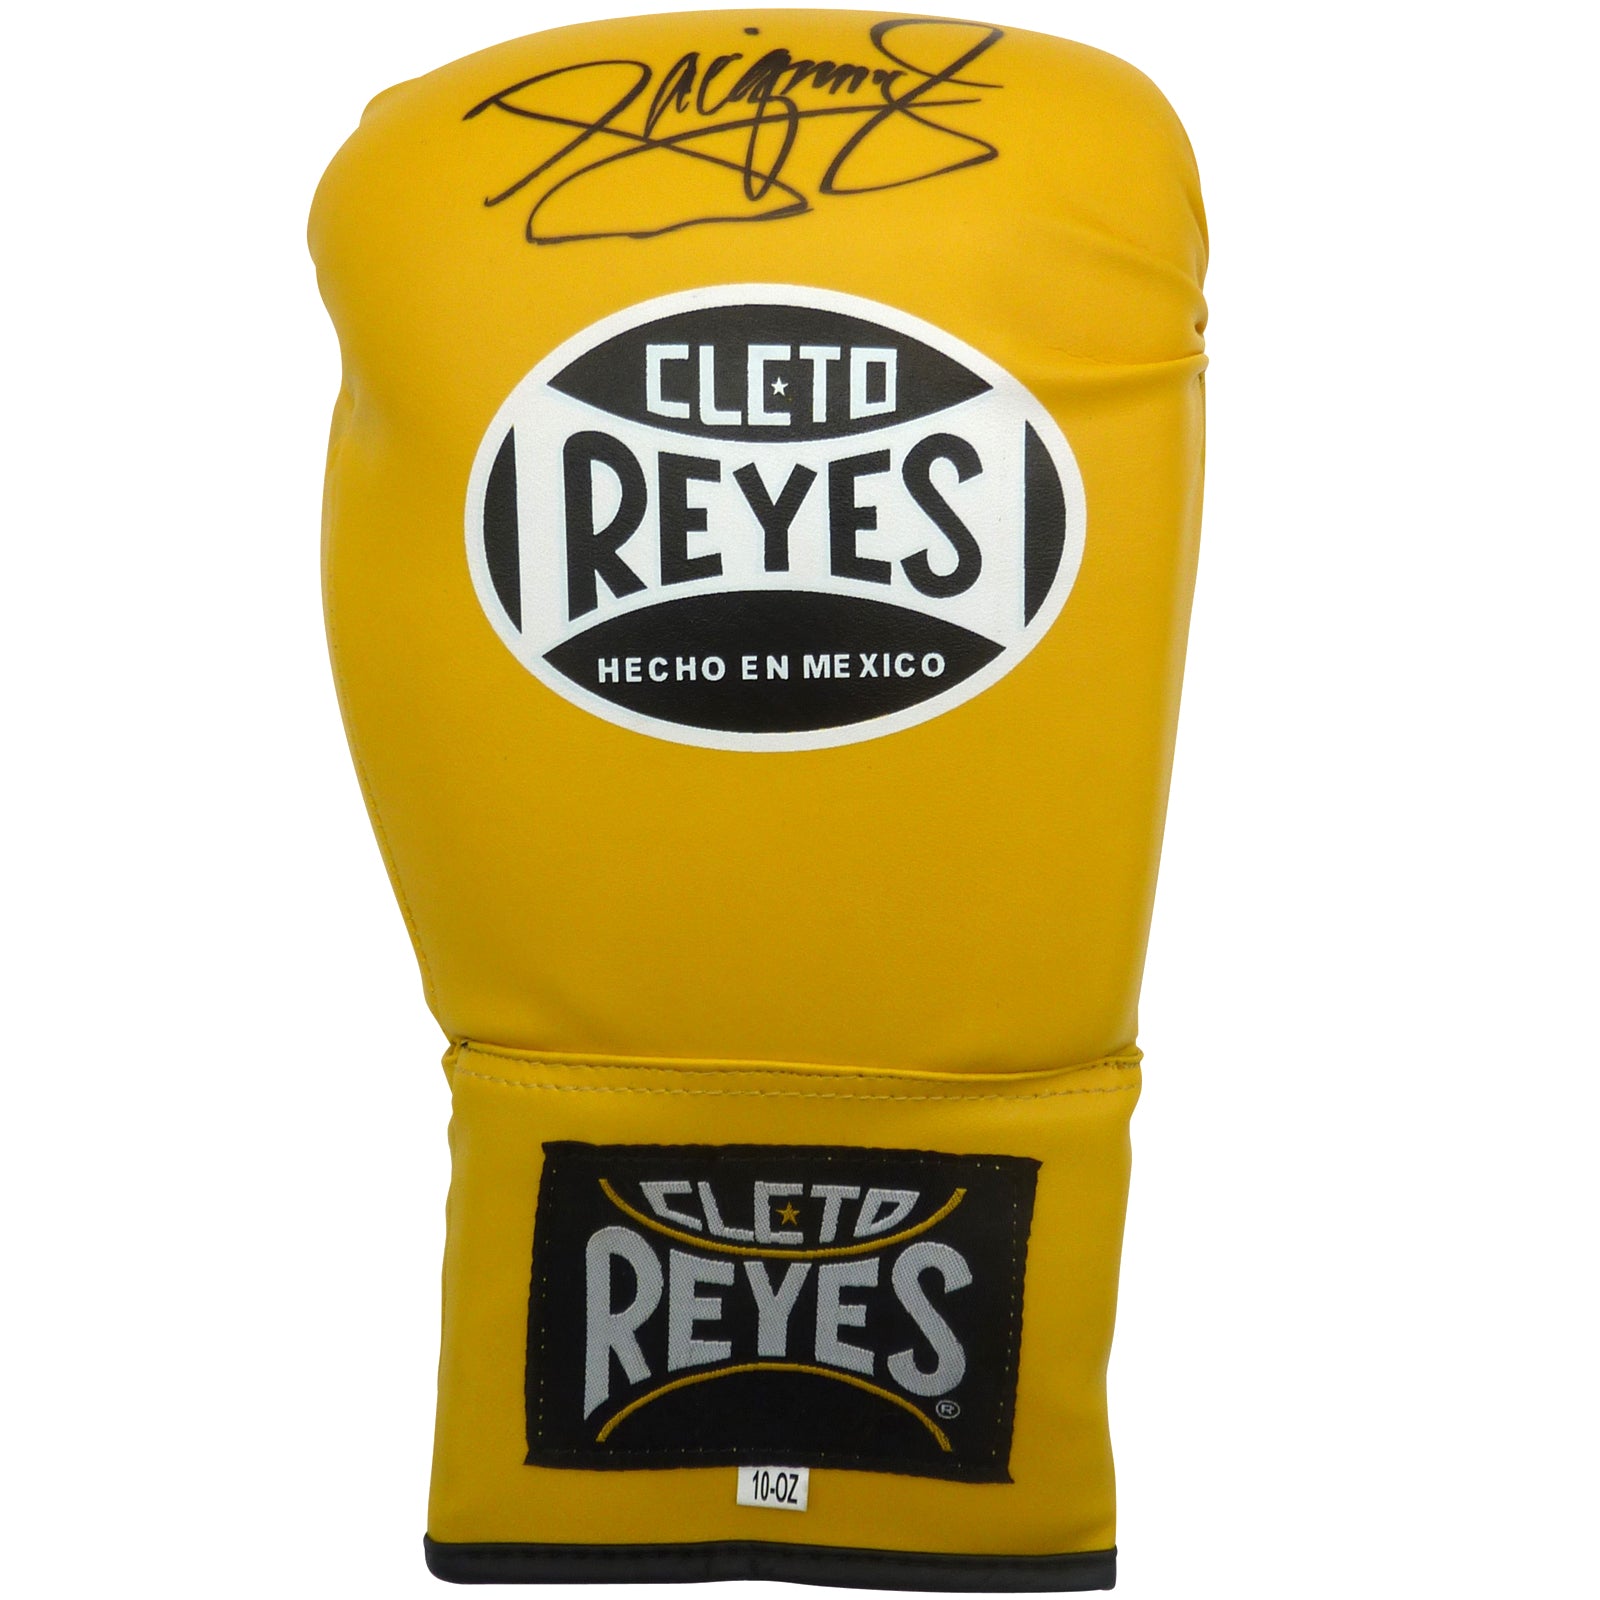 Manny Pacquiao Autographed Cleto Reyes (Yellow) Boxing Glove - PSADNA